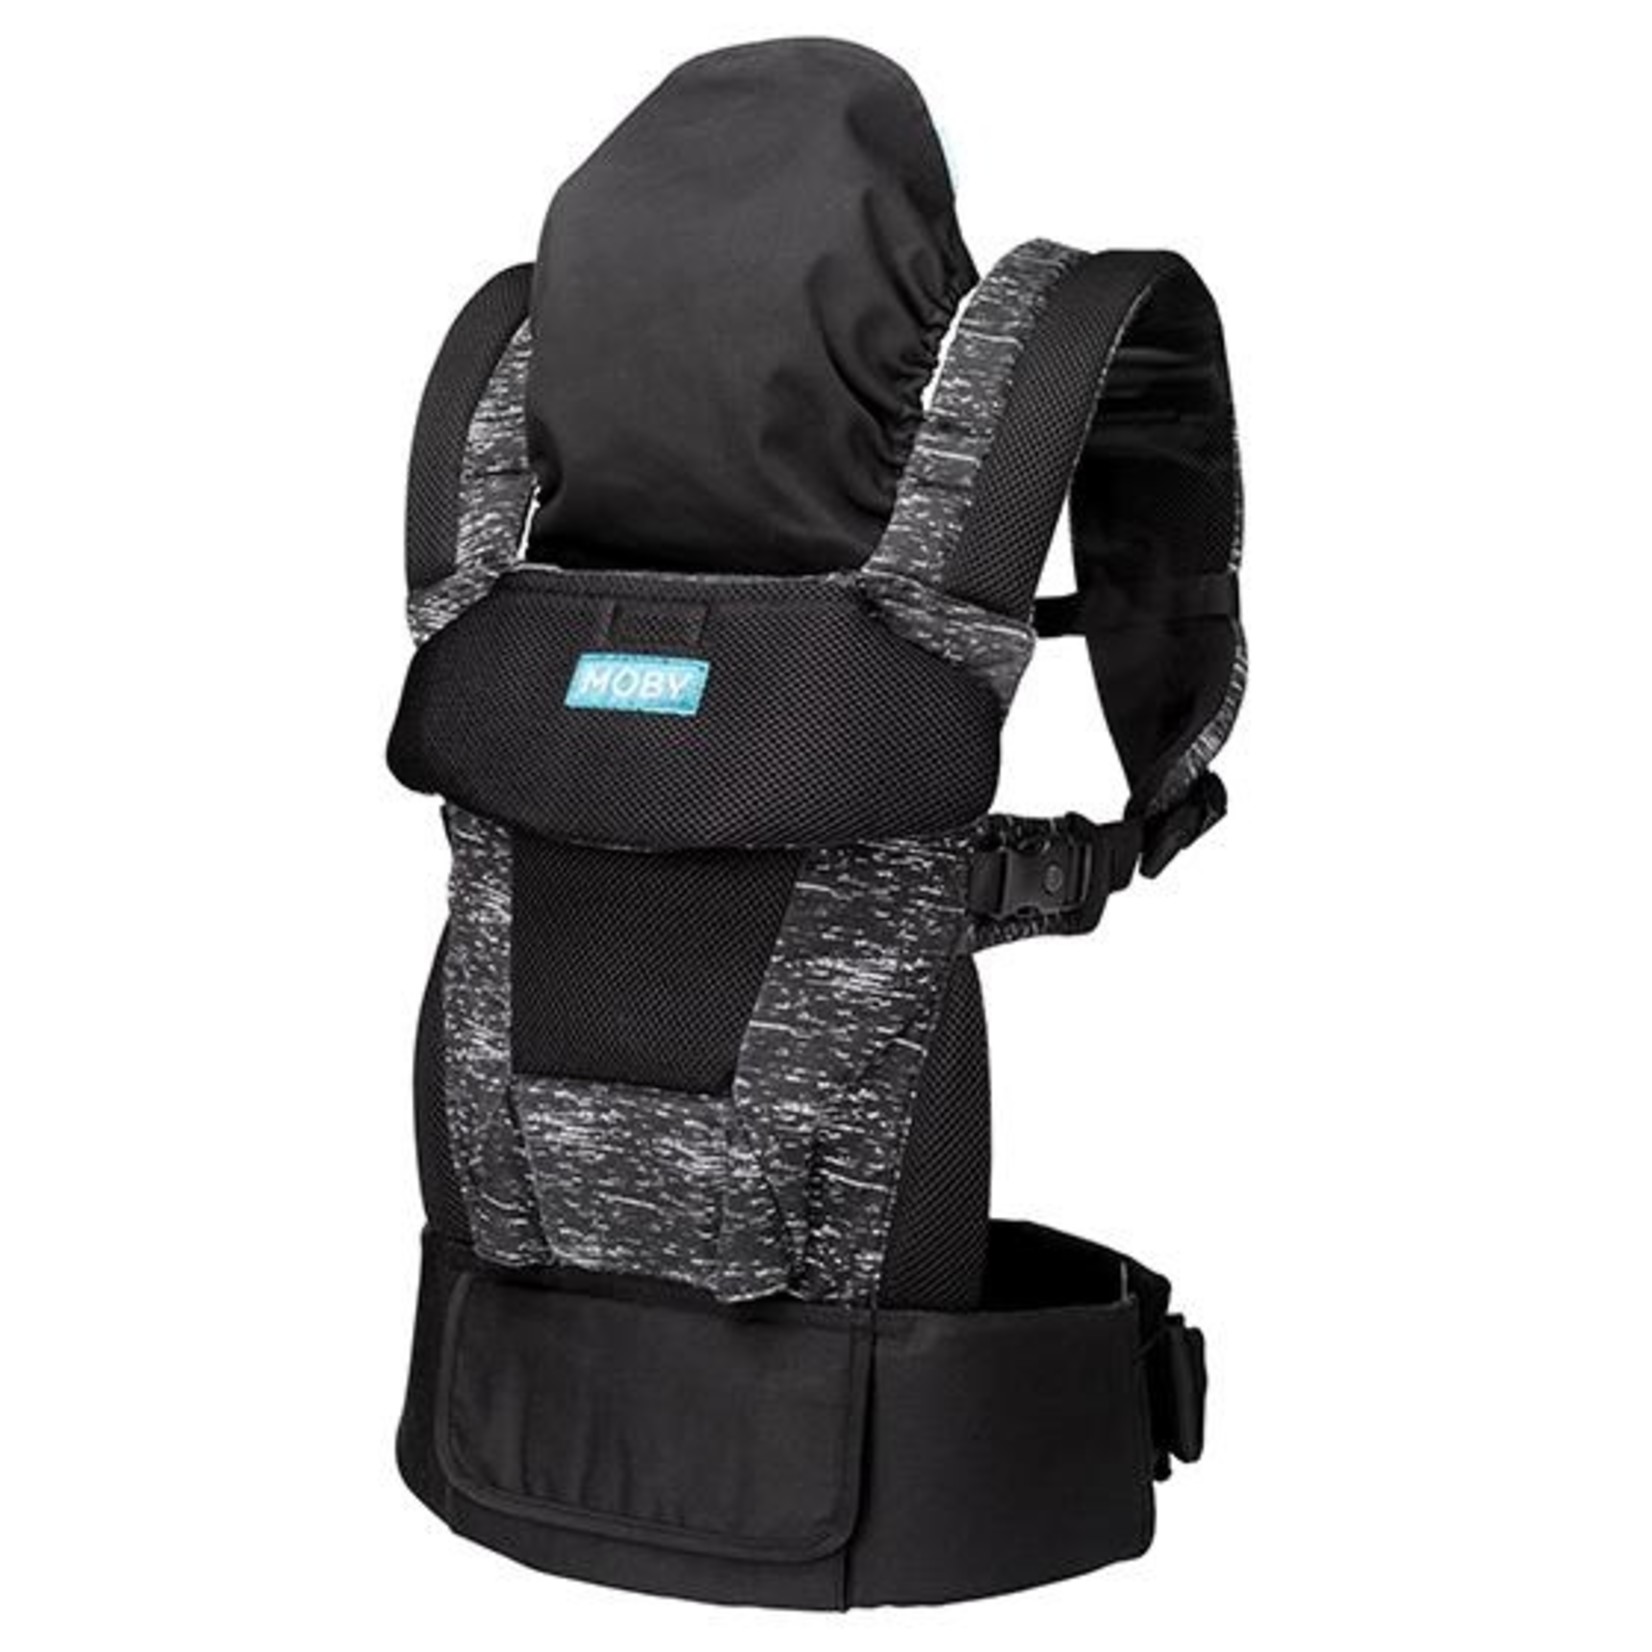 Moby Move Carrier-Twilight Black